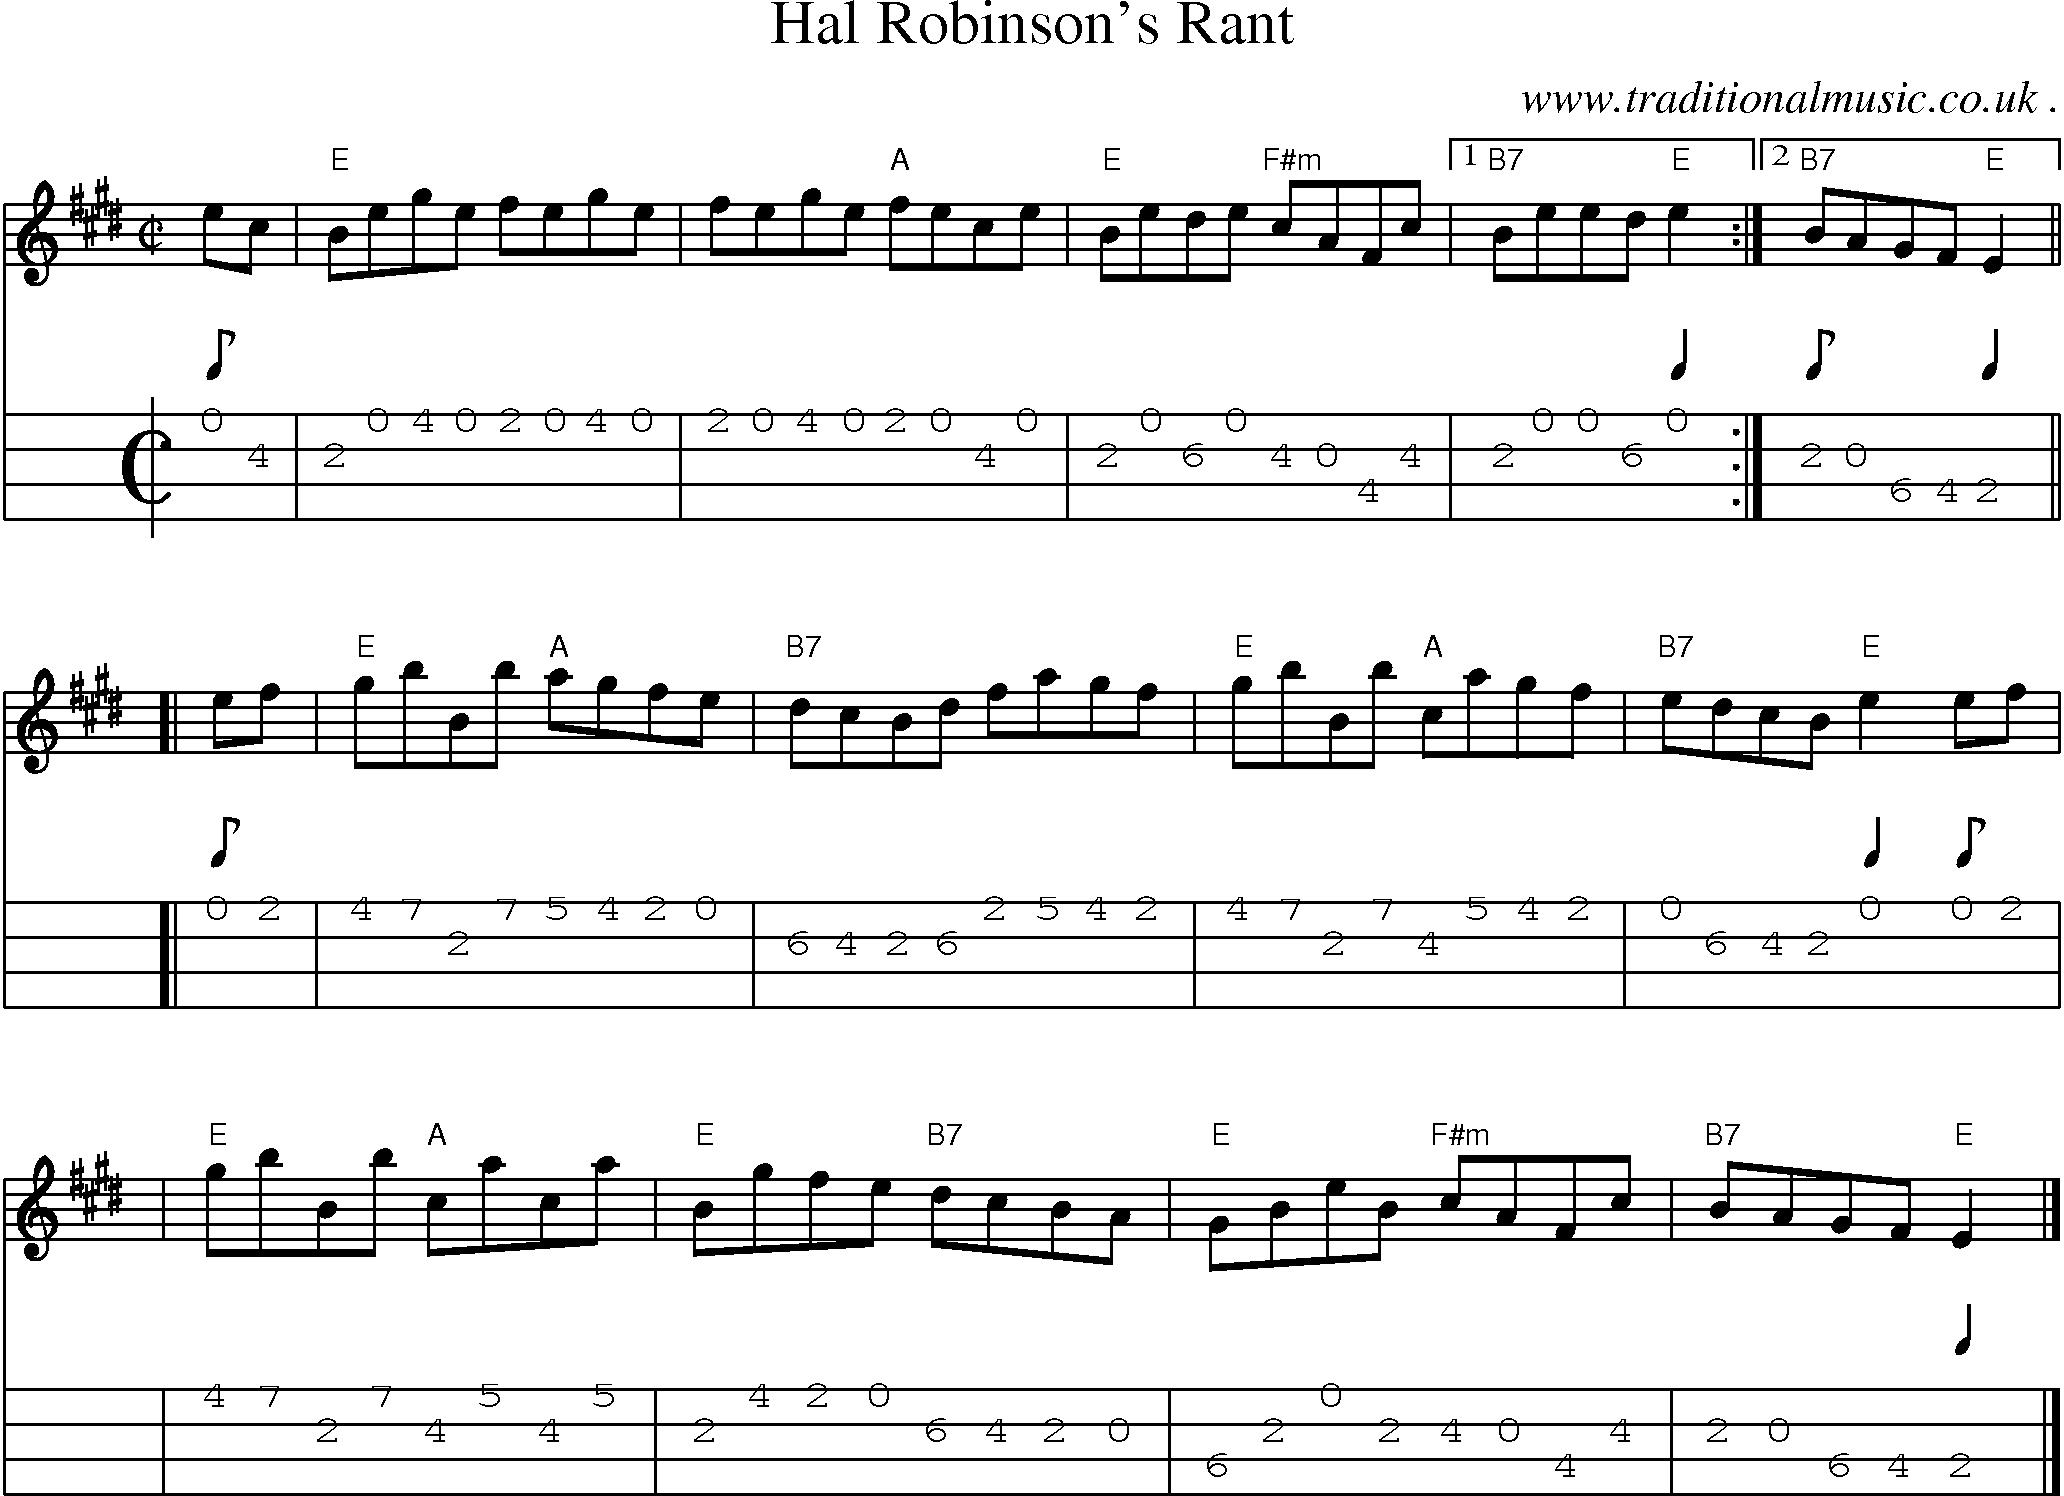 Sheet-music  score, Chords and Mandolin Tabs for Hal Robinsons Rant